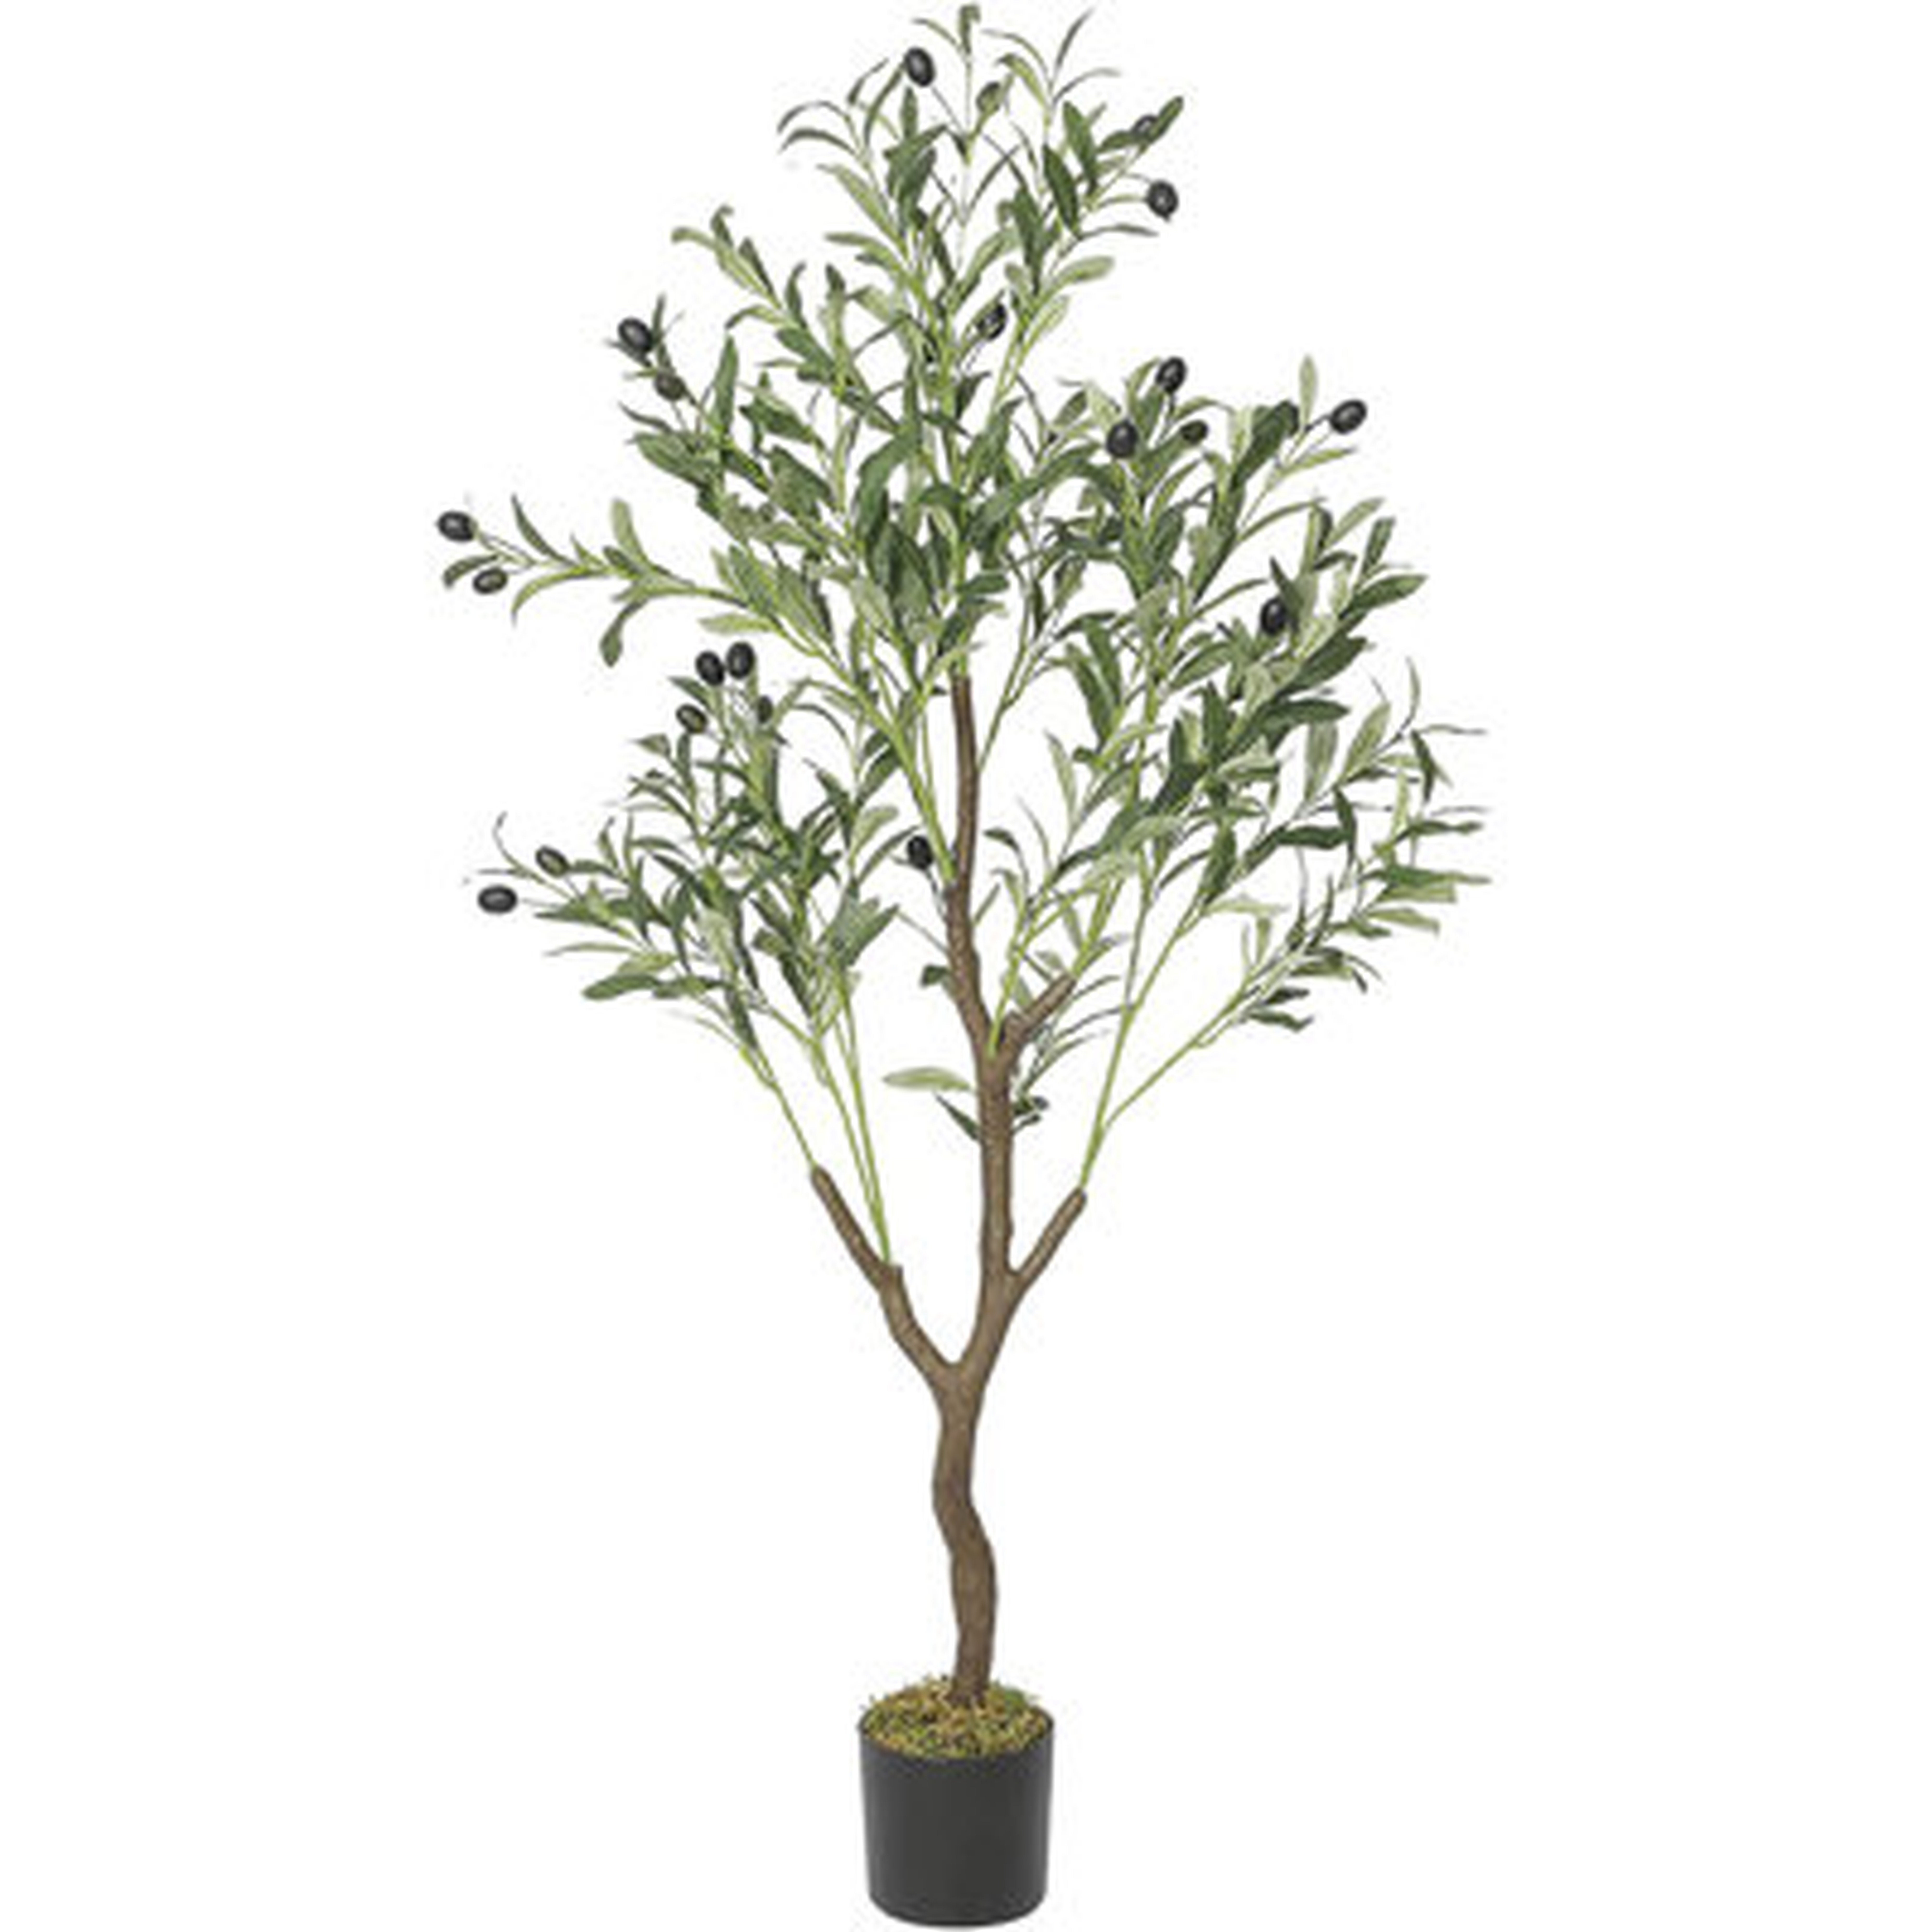 Artificial Olive Tree 4ft Tall Fake Potted Olive Silk Tree With Planter Large Faux Olive Branches And Fruits Artificial Tree For Modern Home Office Living Room Floor Decor Indoor, 504 Leaves - Wayfair